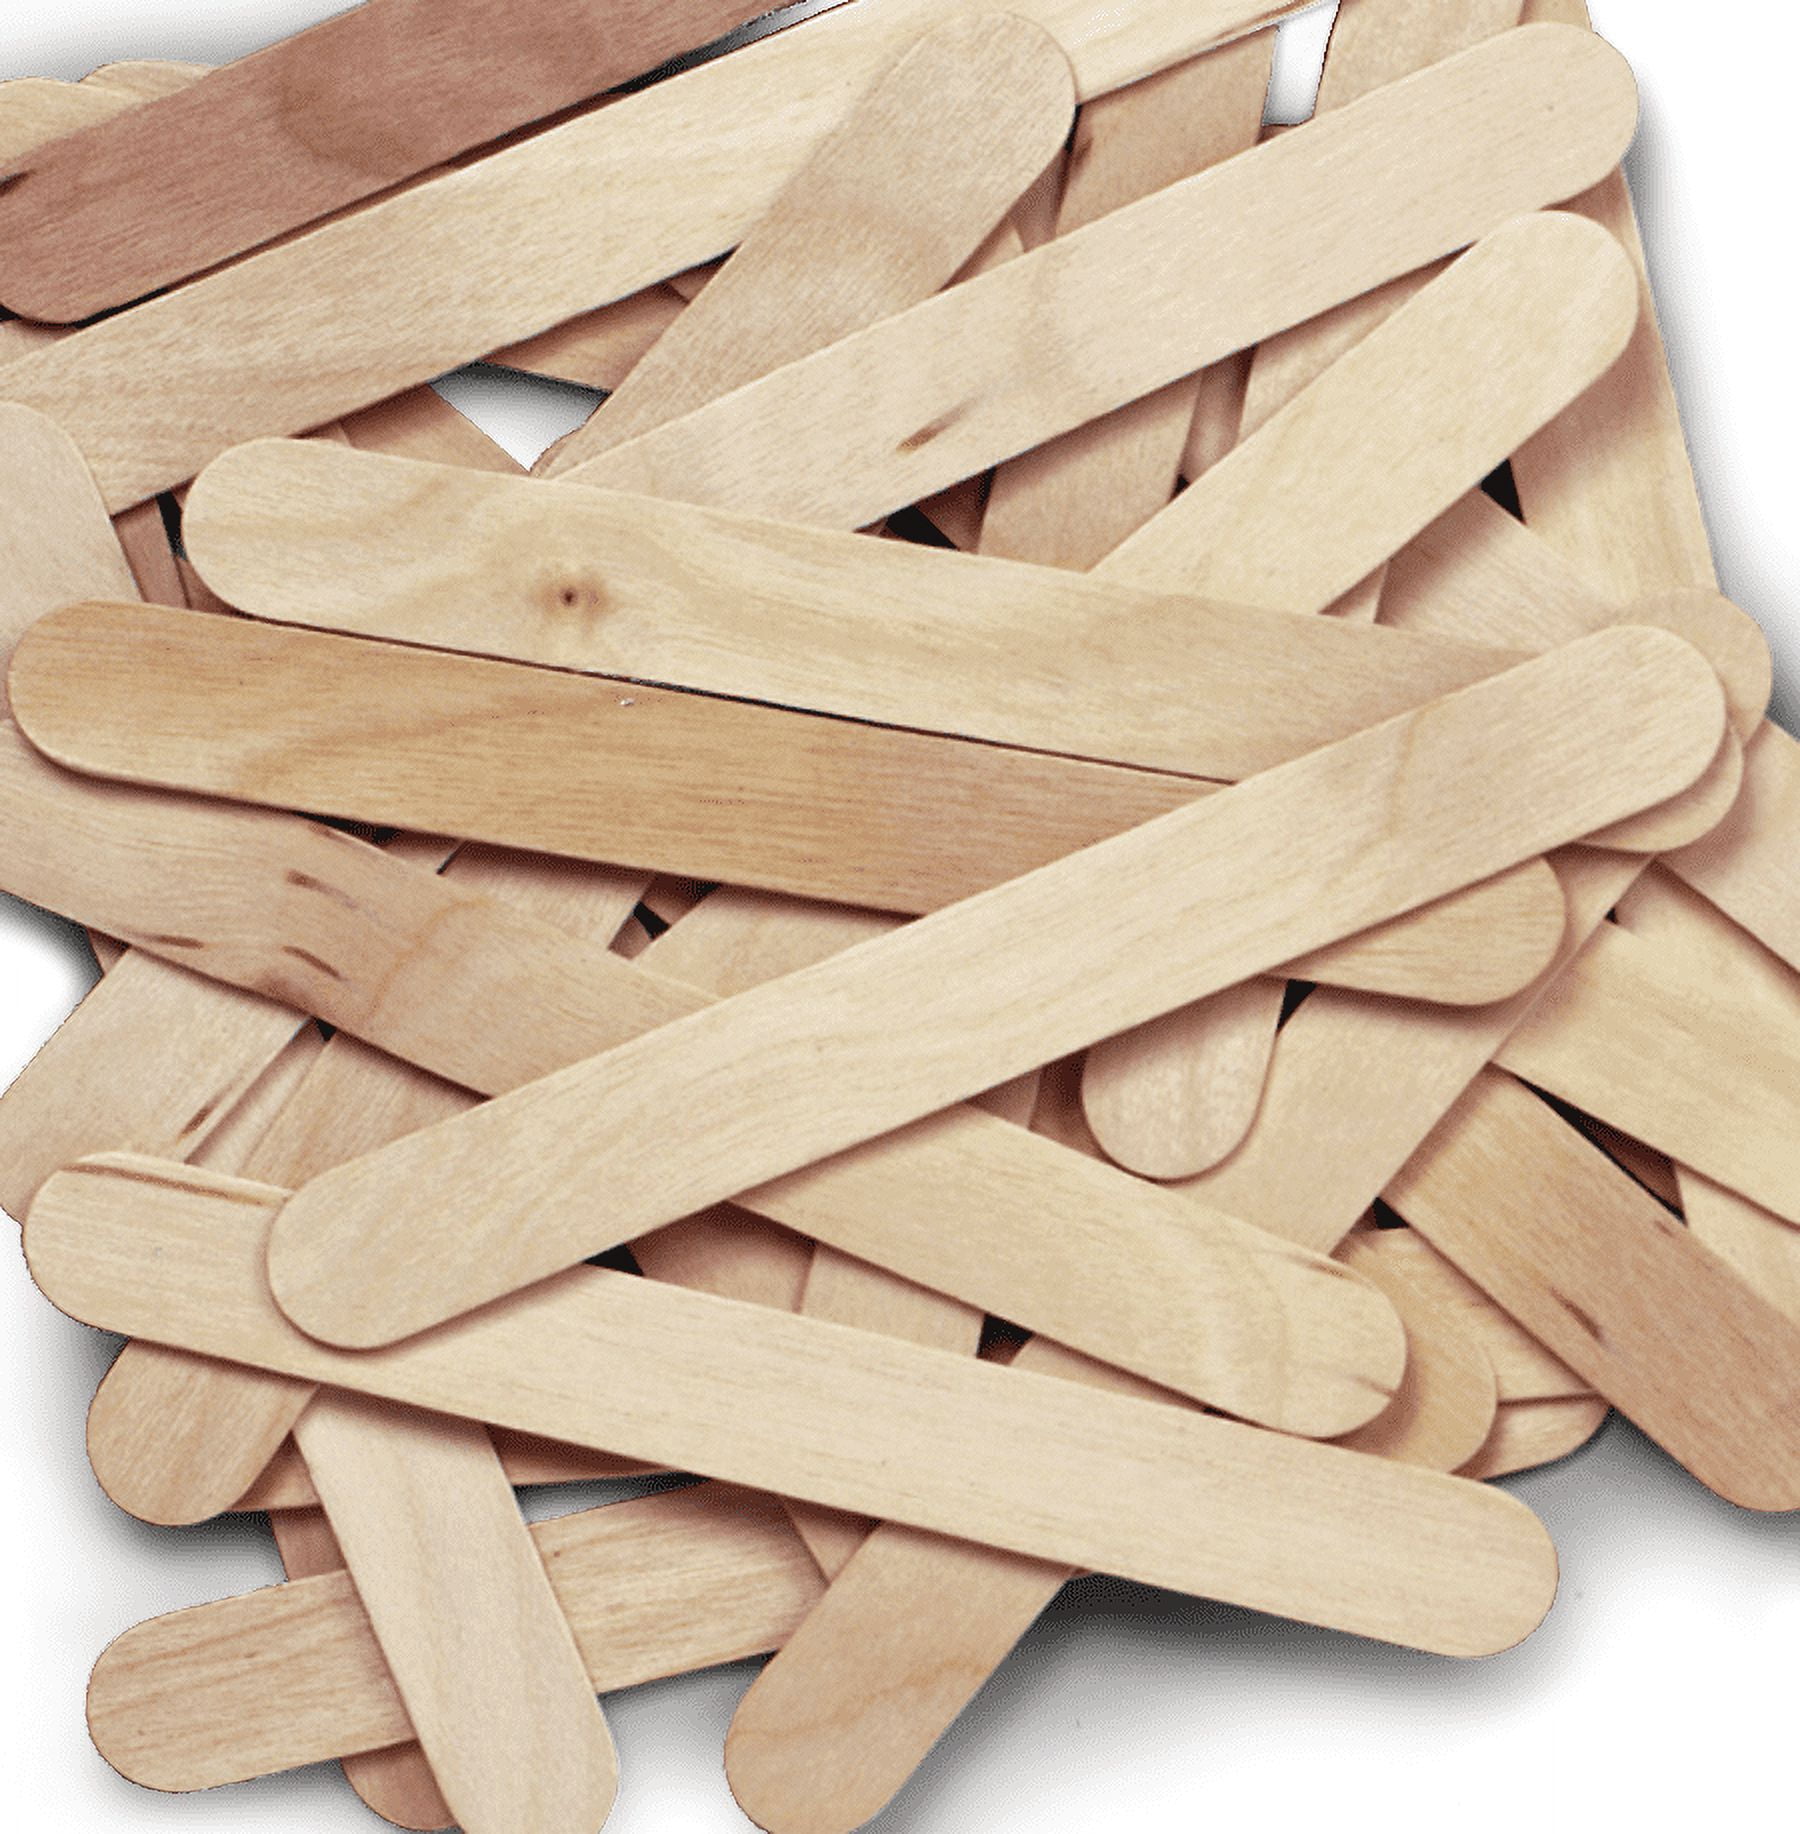 100 pcs New Colored Natural Wood Popsicle Sticks Wooden Craft Sticks 4-1/2  x 3/8 